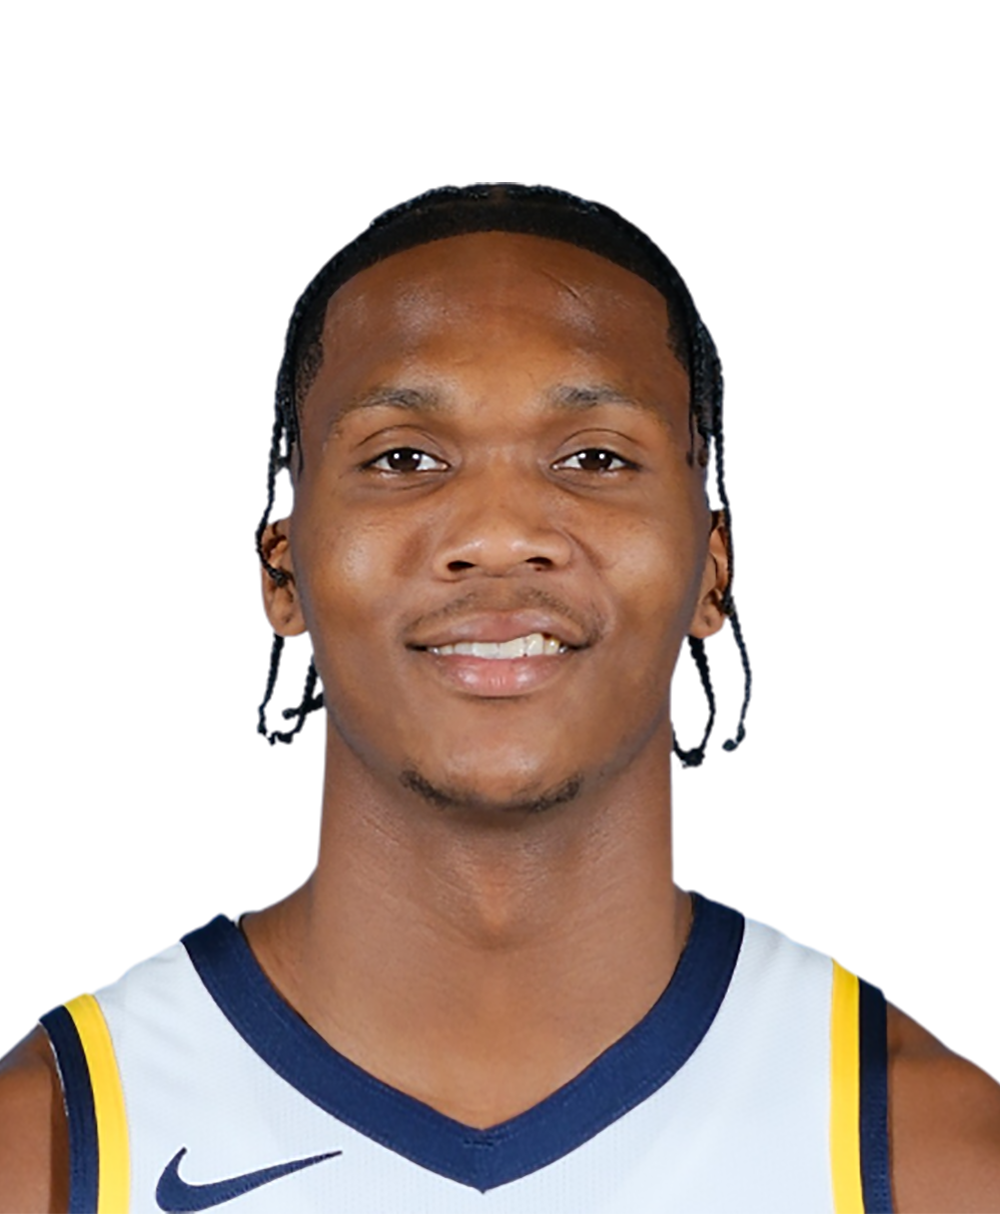 Indiana Pacers - 26 points tonight for Bennedict Mathurin.